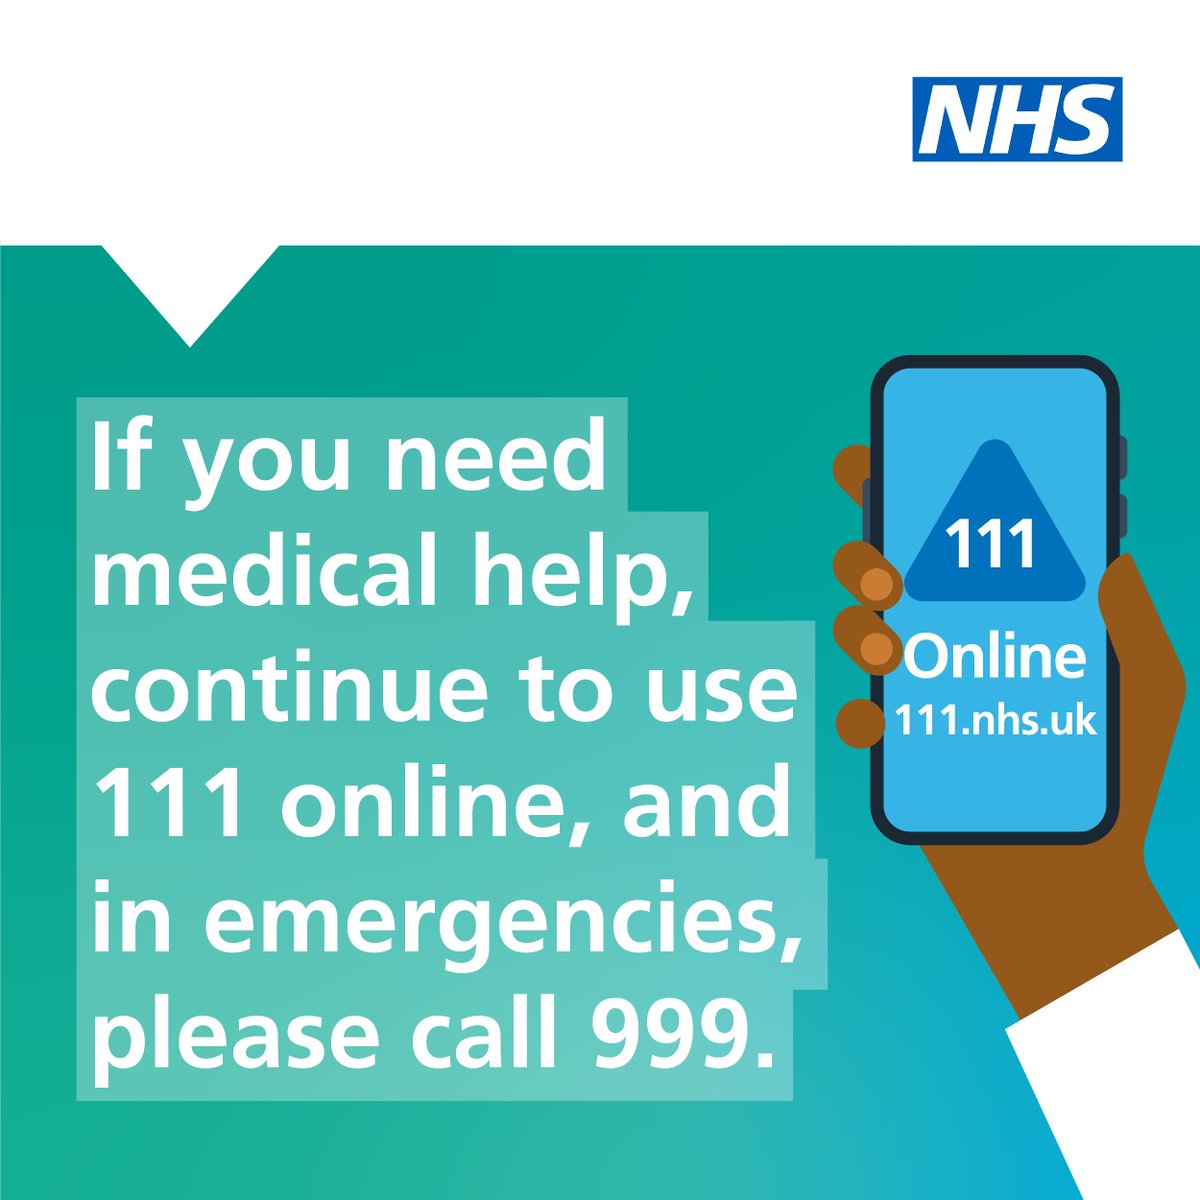 Junior doctors are taking strike action from 7am on Saturday 24 February until 11.59pm on Wednesday 28 February. If you need medical help, continue to use 111 online, and in emergencies, please call 999. 📲